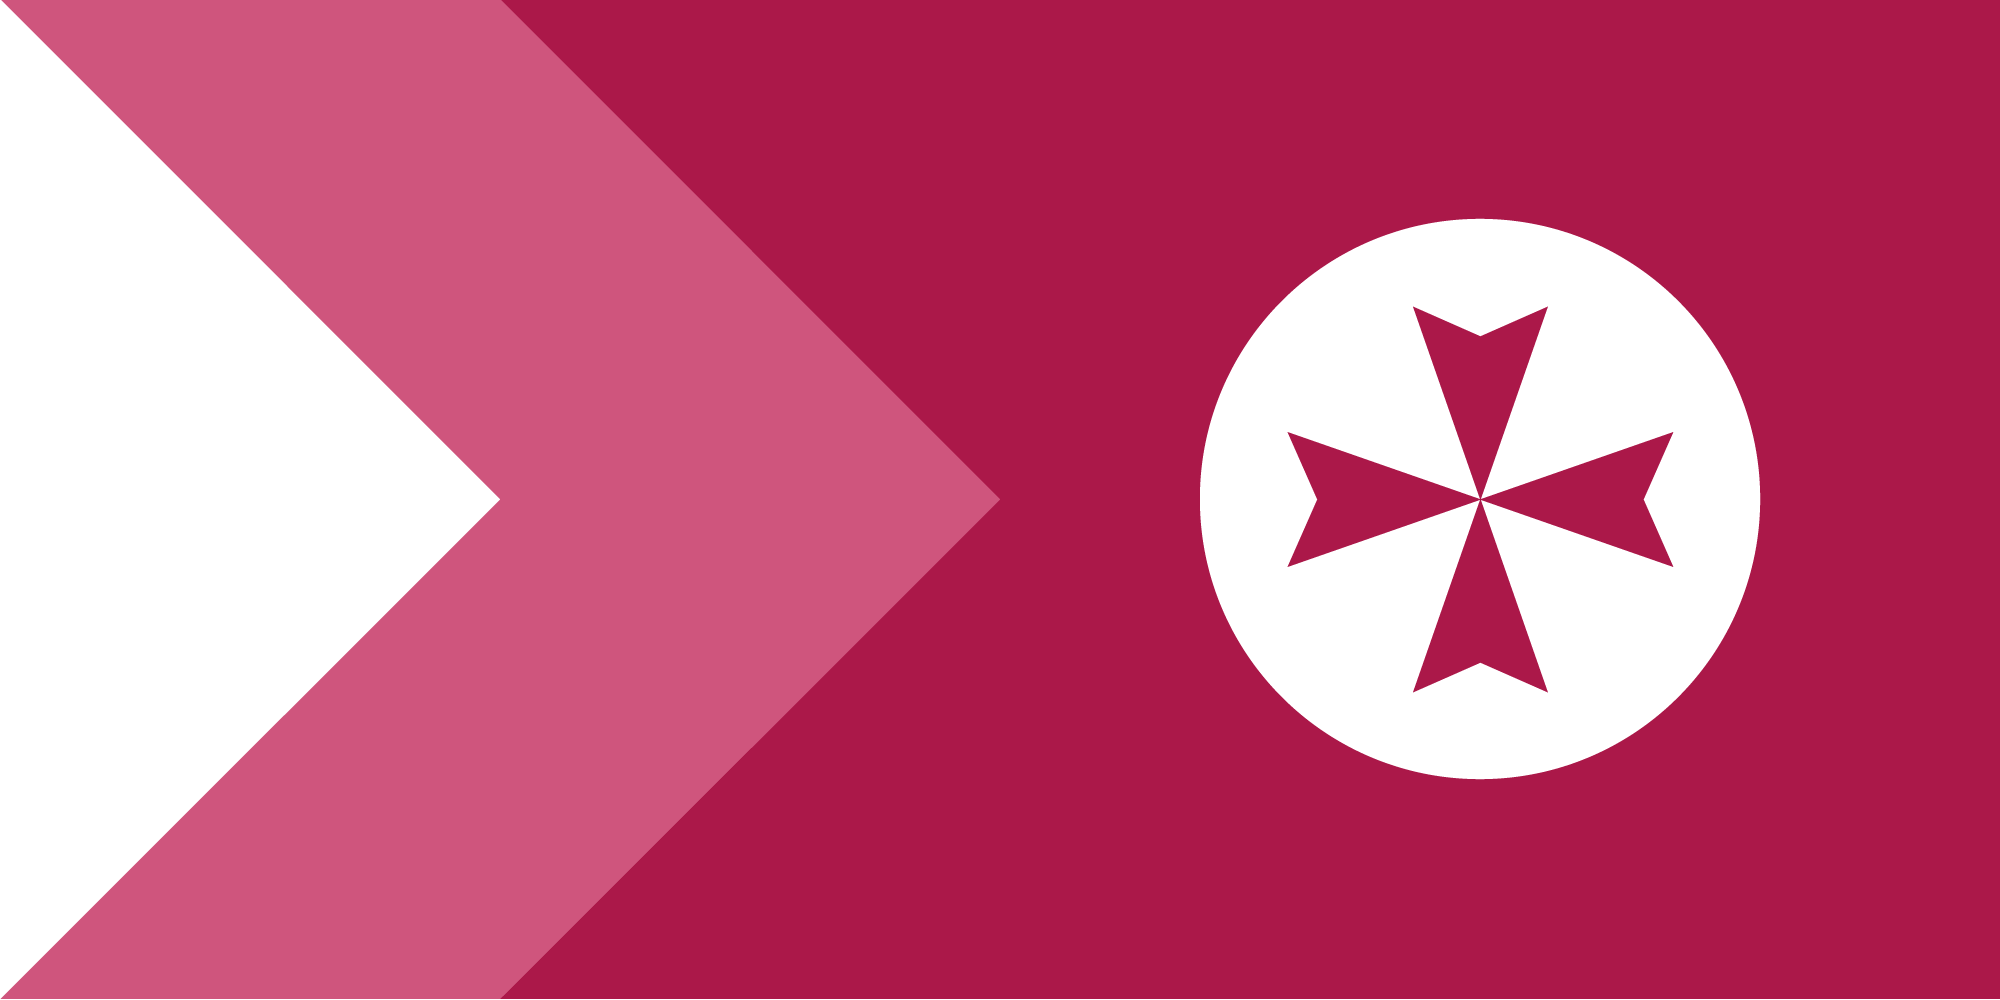 A state flag proposal for QLD